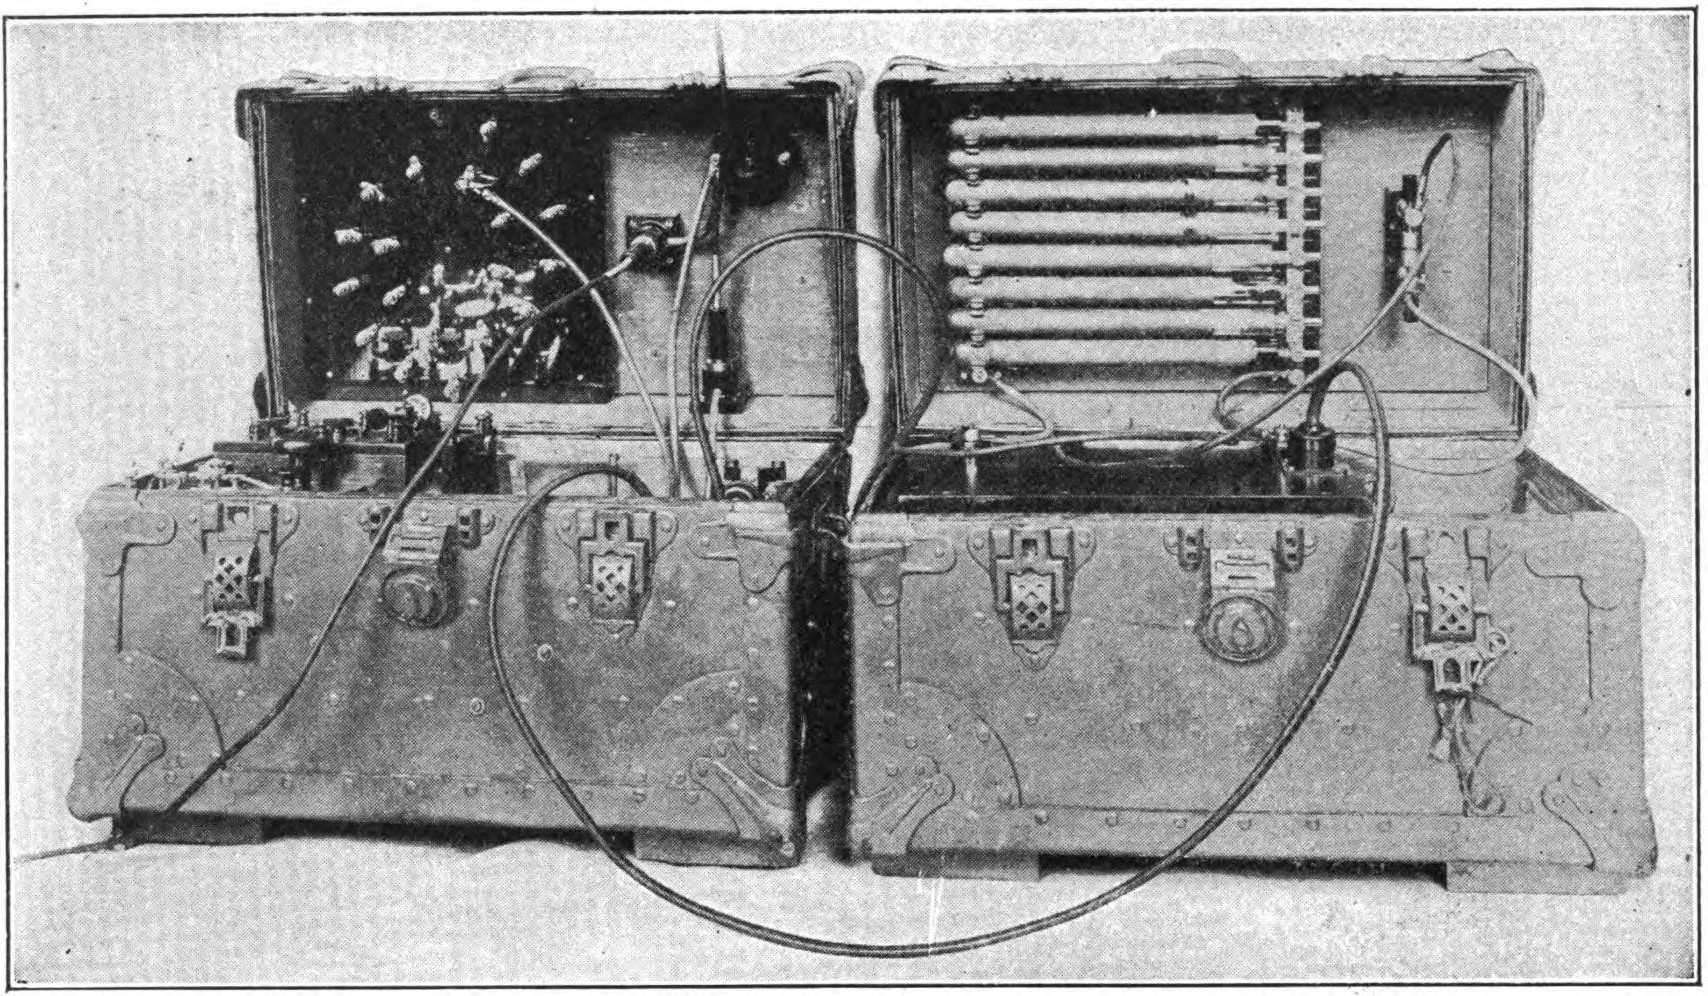 FIG. 62.—Portable pack set. The receiving outfit is contained in the left hand case; also the key and interrupter. The tubular condenser, spark gap, and induction coil may be seen in the right hand case.